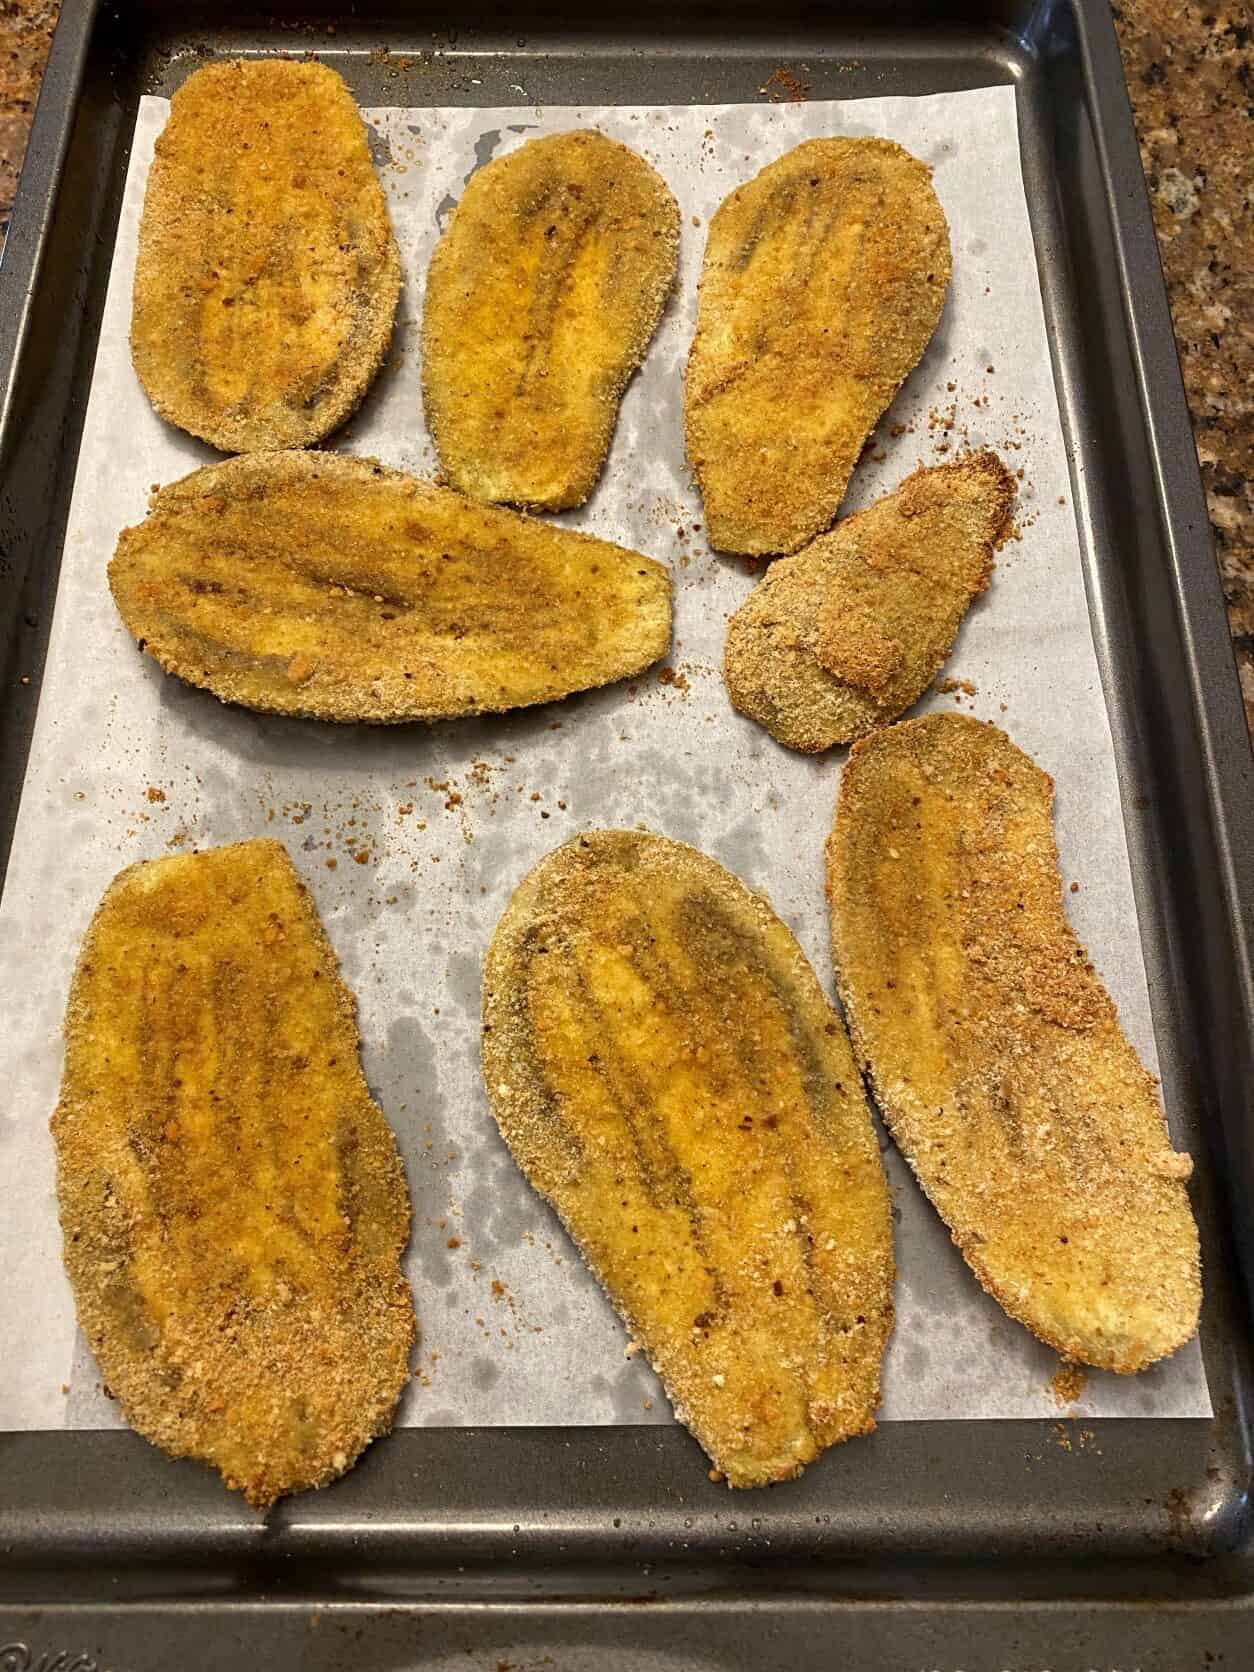 Eggplant slices breaded and cooked